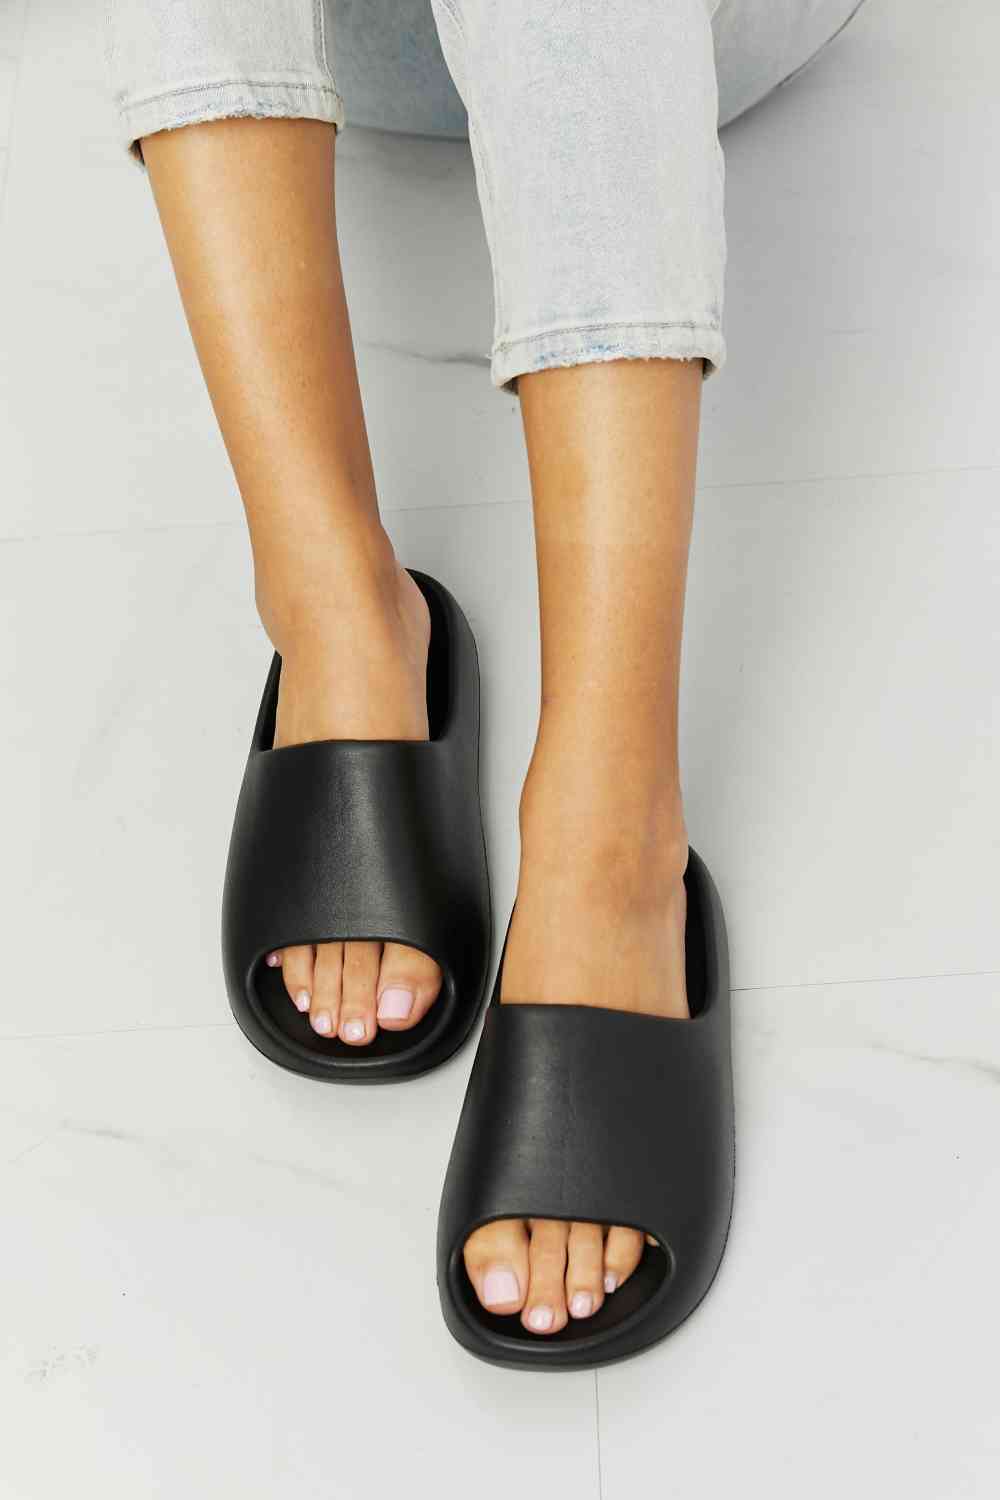 Light Gray NOOK JOI In My Comfort Zone Slides in Black Shoes